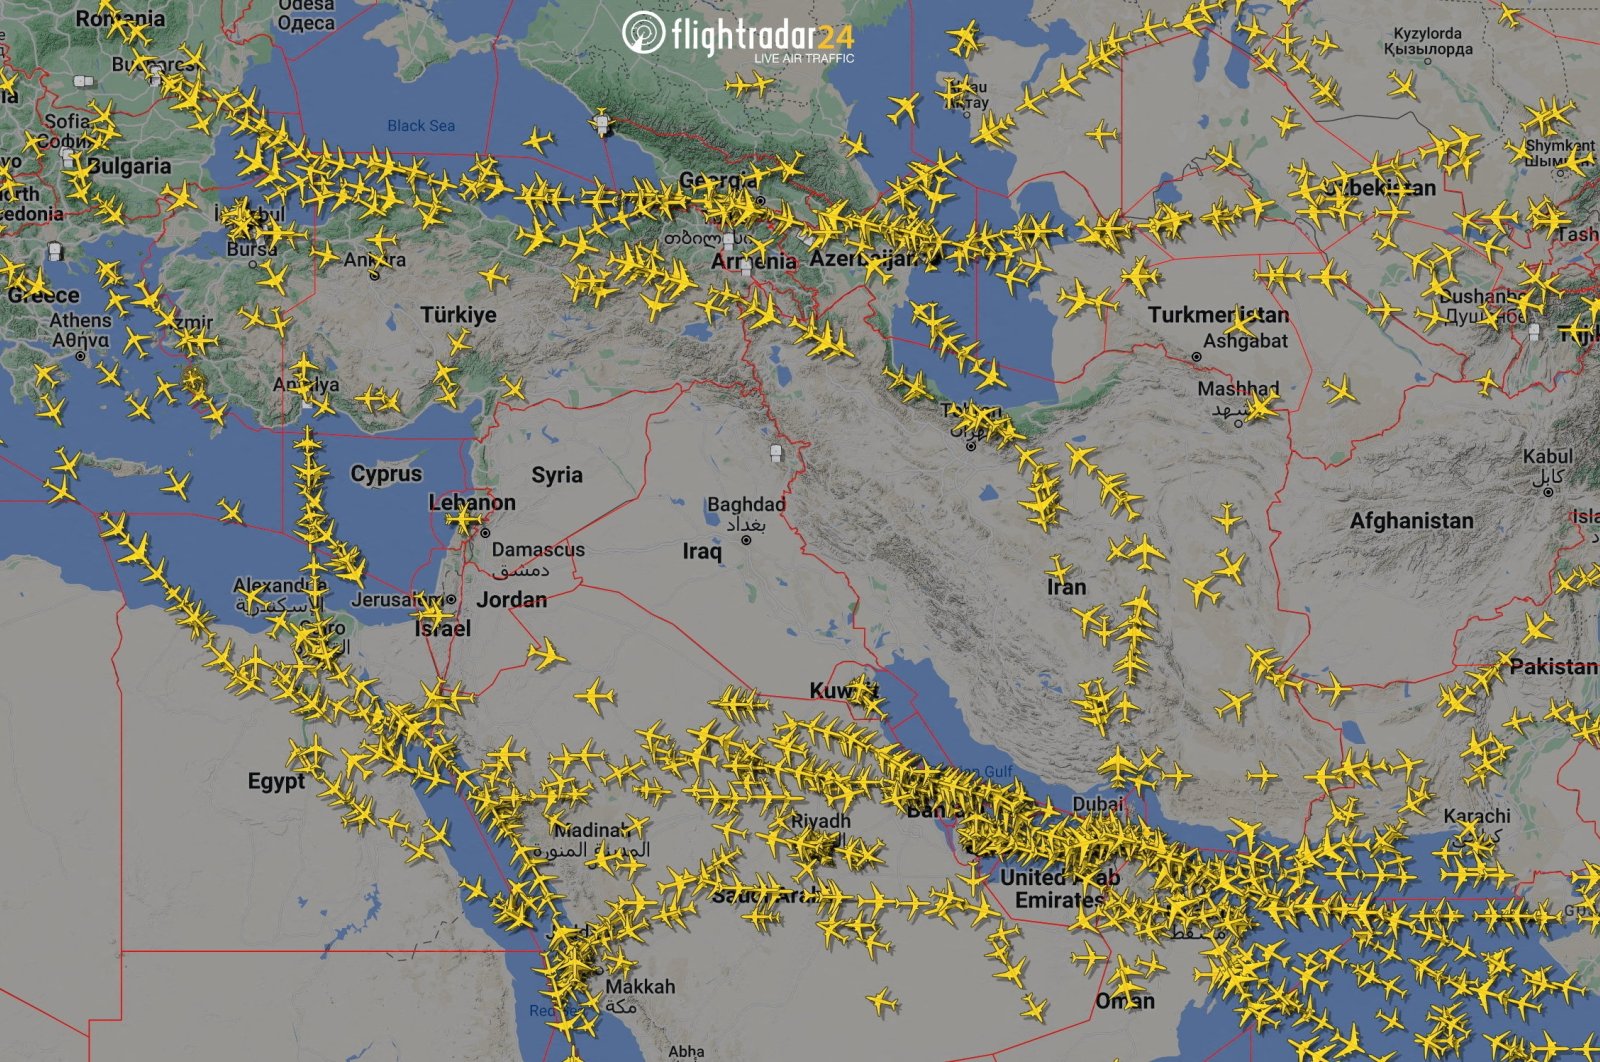 Iran's attack on Israel prompts biggest air disruption since Sept. 11